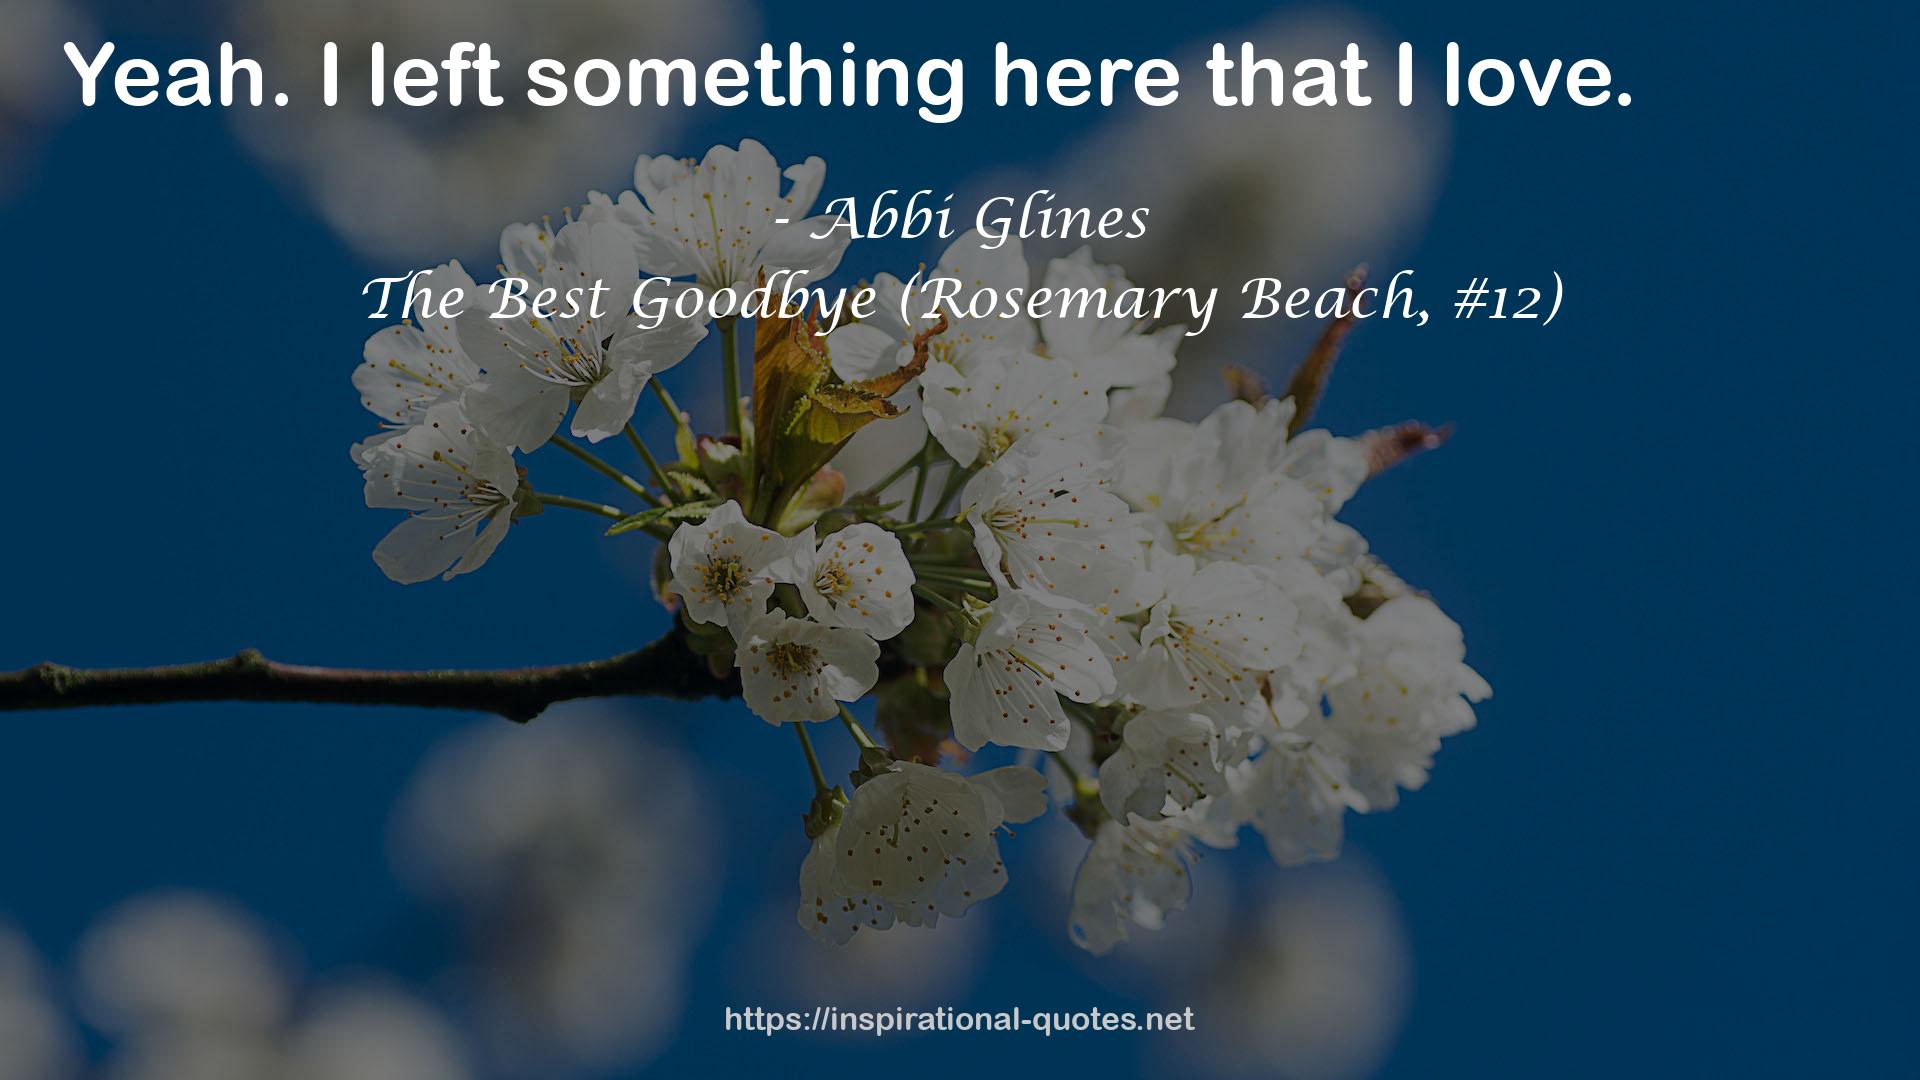 The Best Goodbye (Rosemary Beach, #12) QUOTES